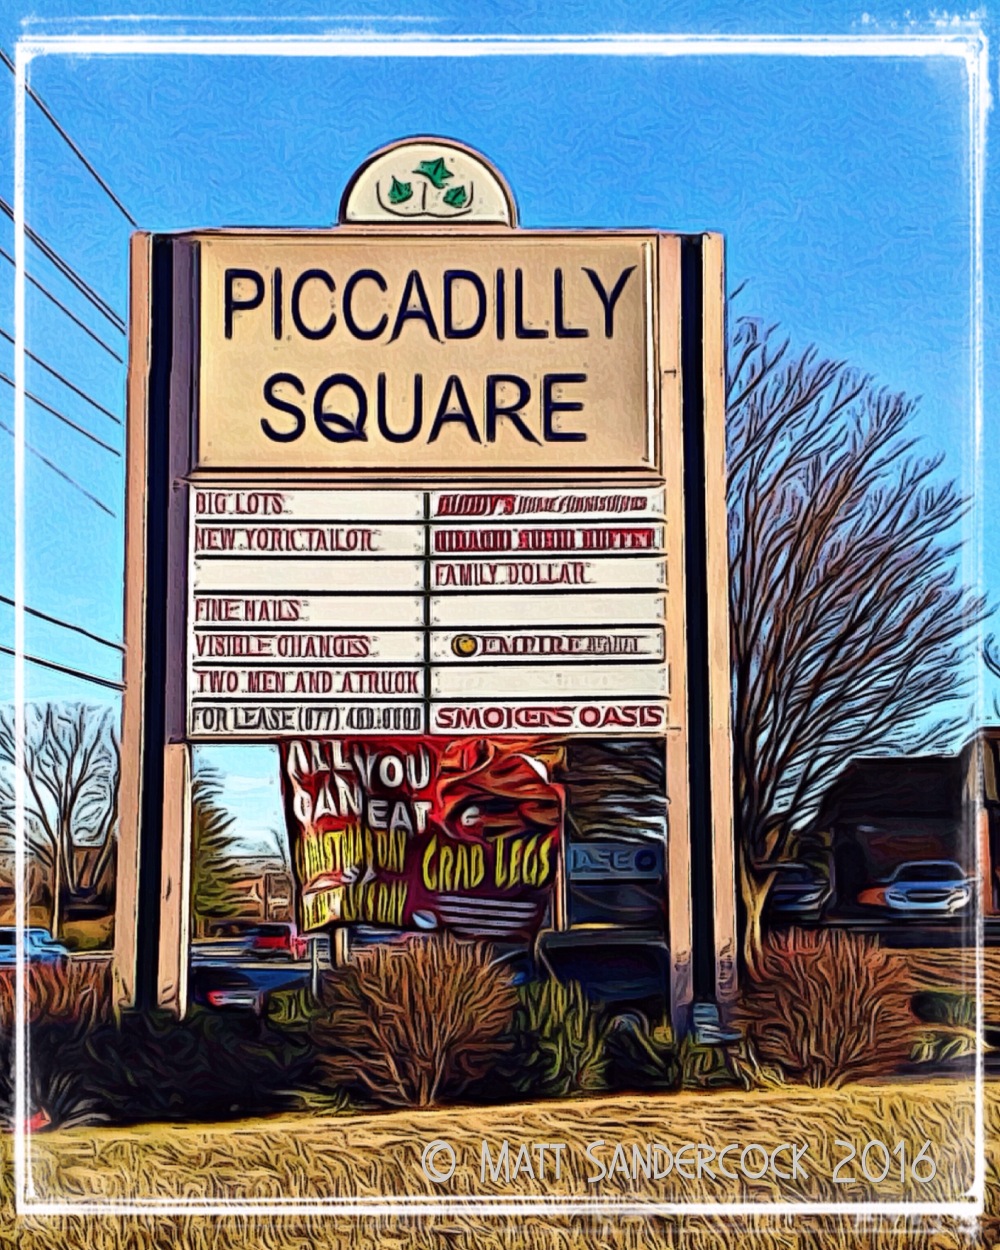 project 366, sign, iColorama, photo-a-day, Piccadilly Square, Louisville, Bardstown Road, shopping center